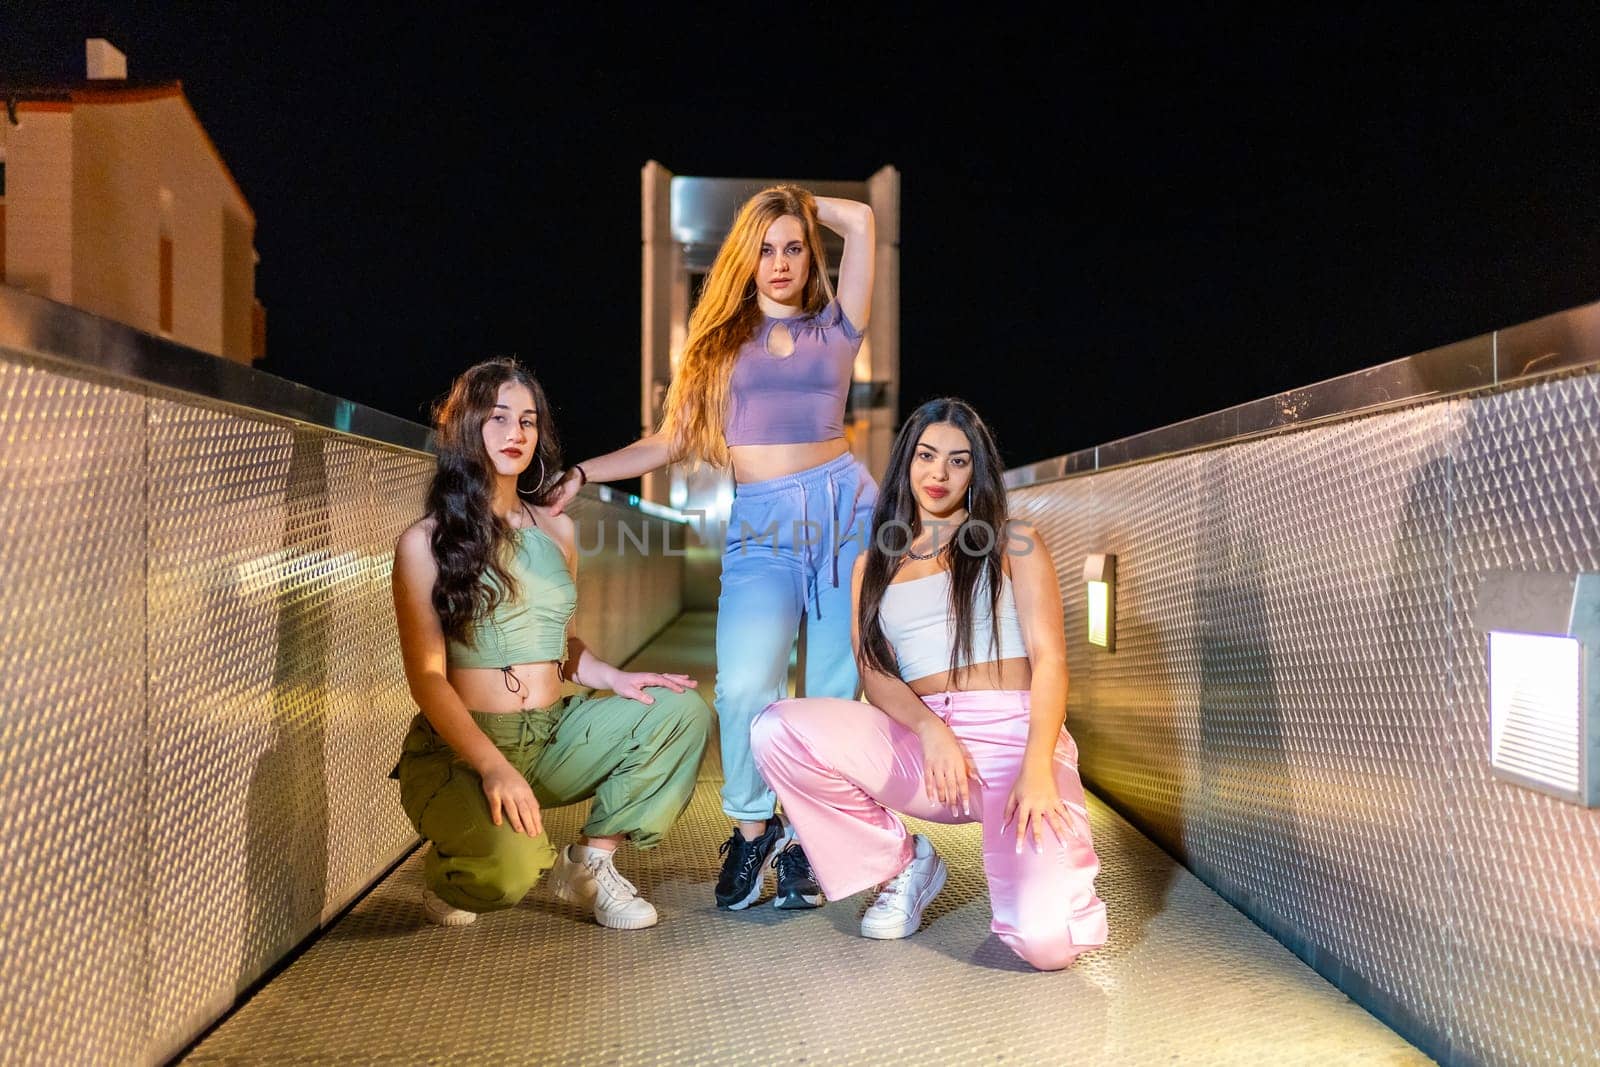 Three female young trap dancers posing together on a bridge at night